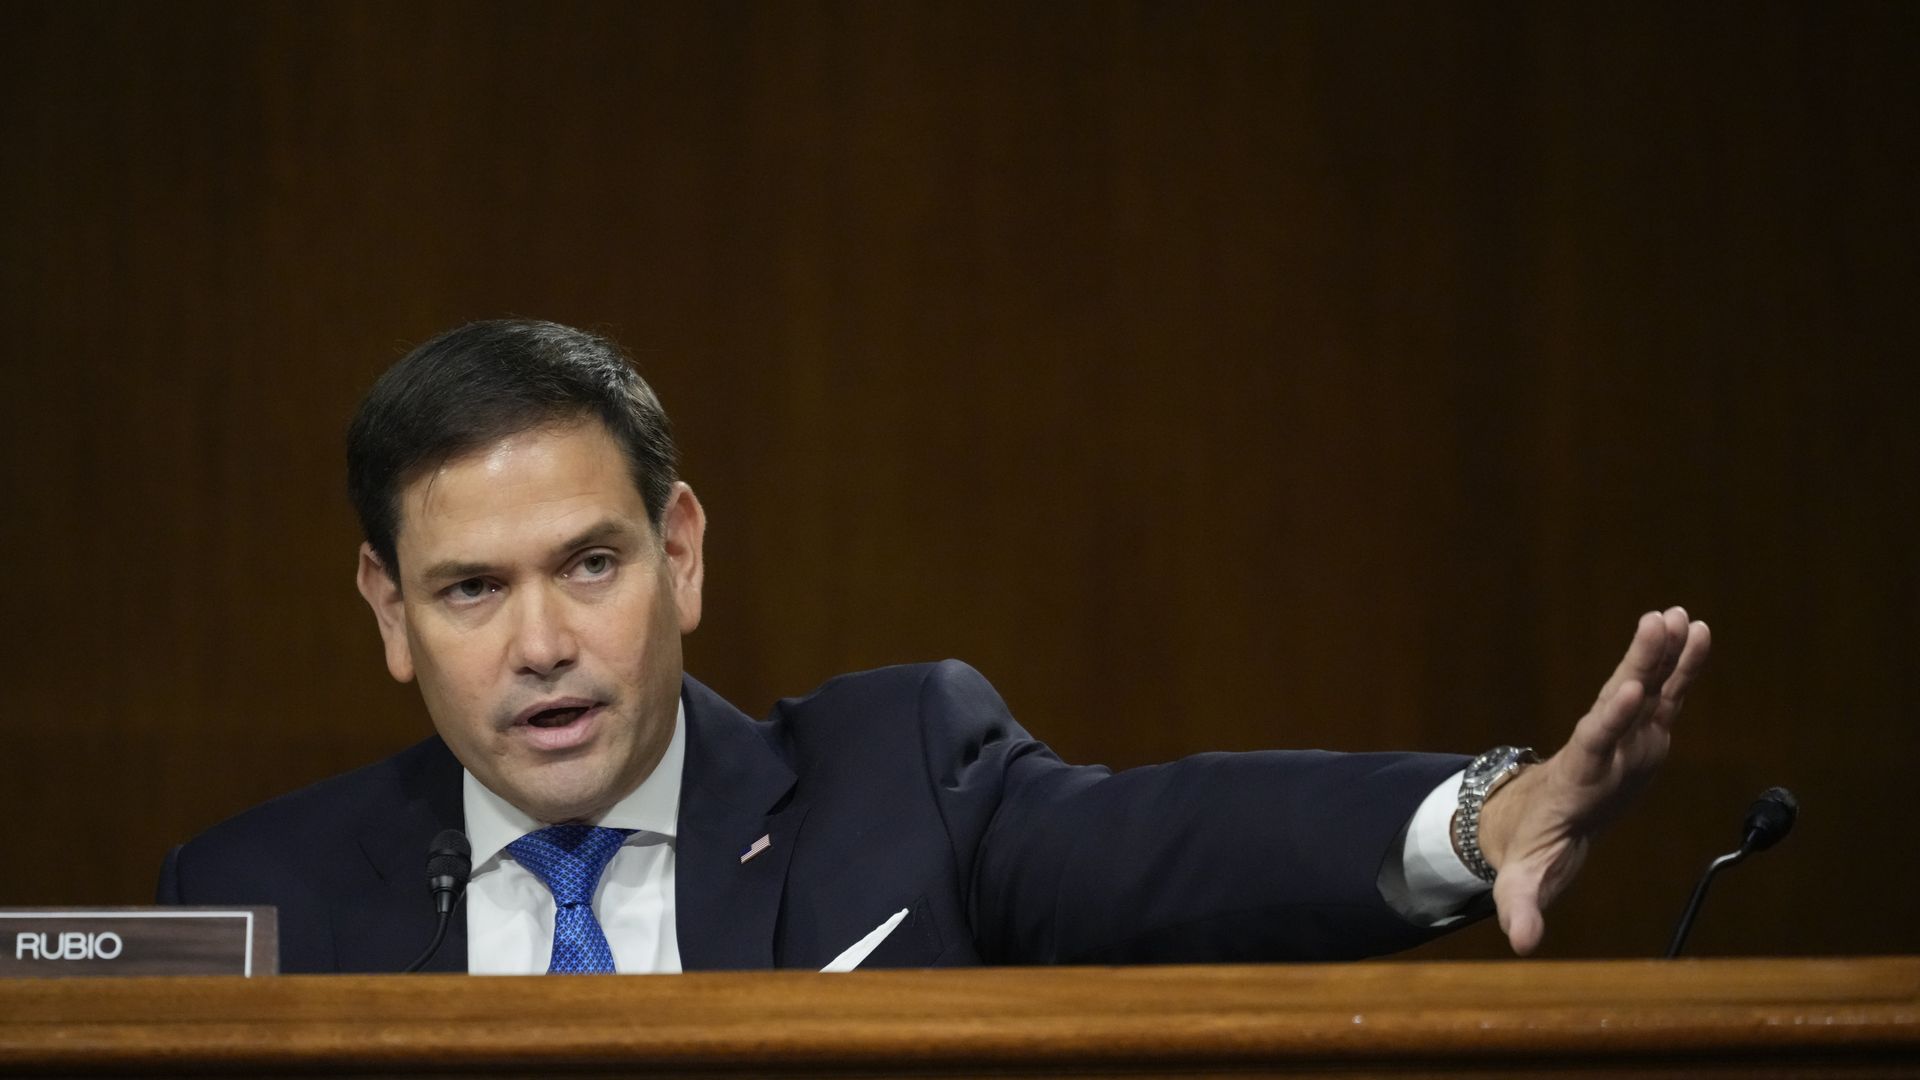 Sen. Marco Rubio is seen speaking during a congressional hearing.